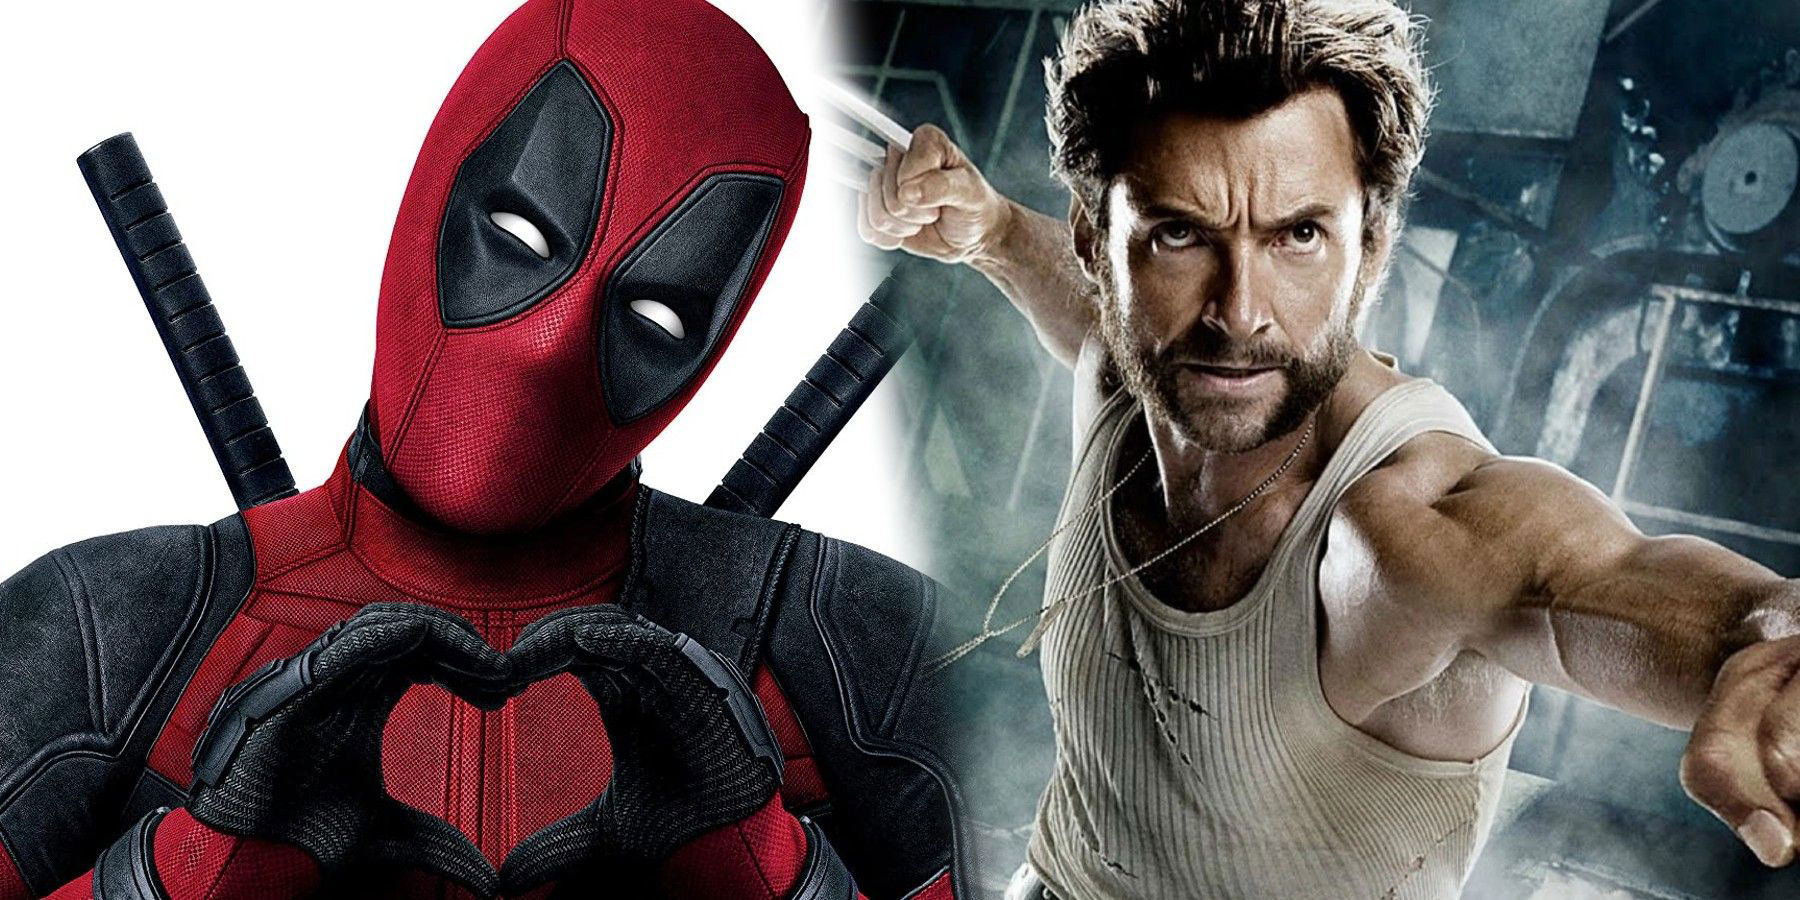 Who Will Be The Villain in Deadpool 3?